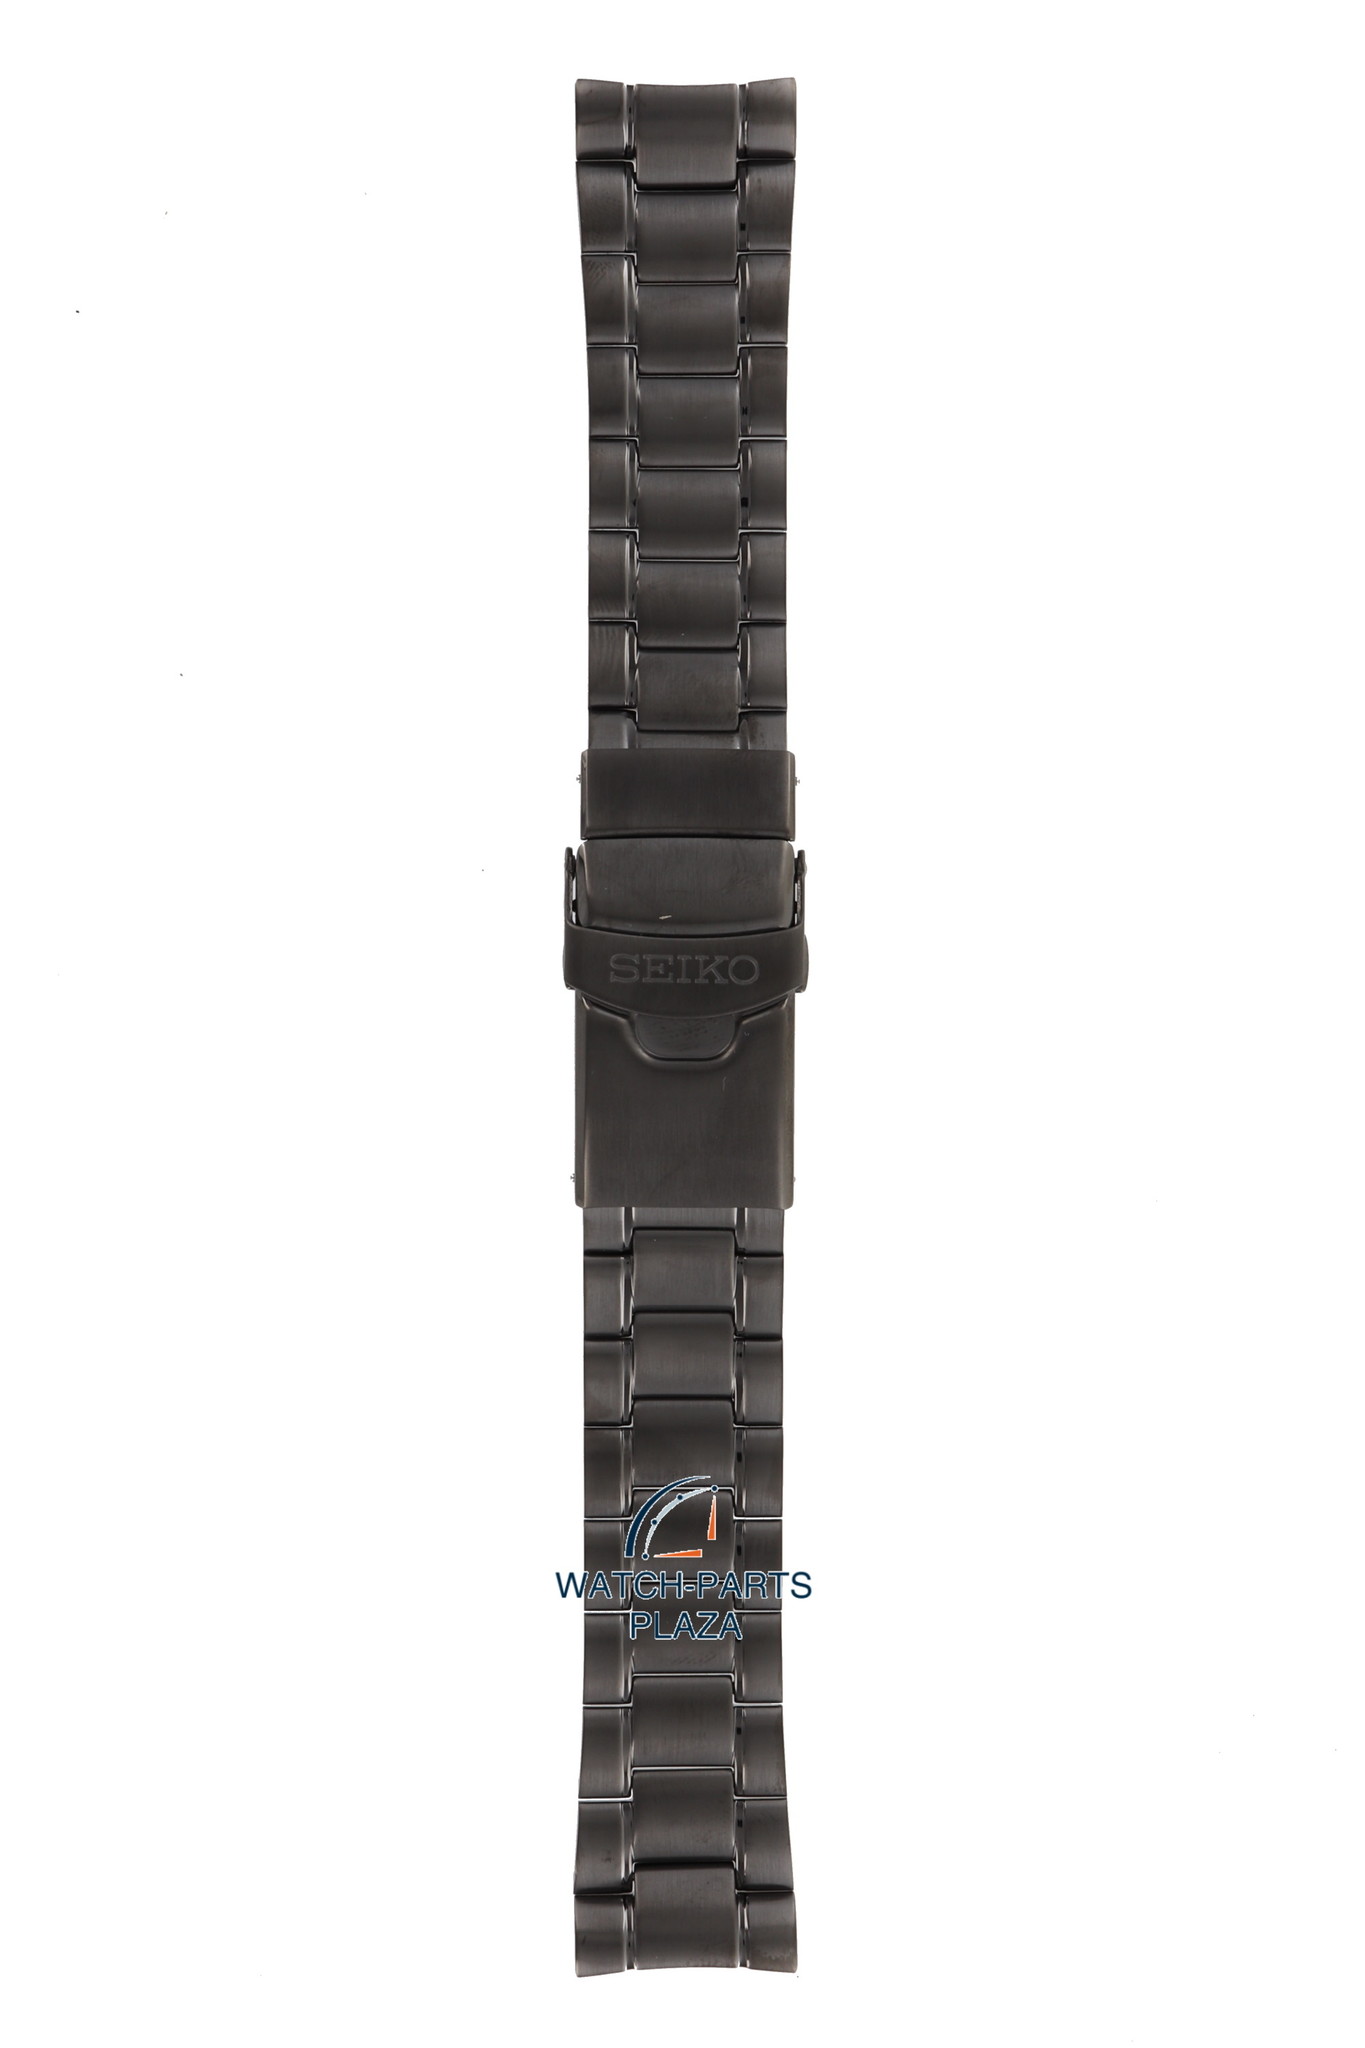 Kammerat Ydmyge influenza Watch band for Seiko Prospex black Turtle SRPD11 - Save The Ocean -  WatchPlaza